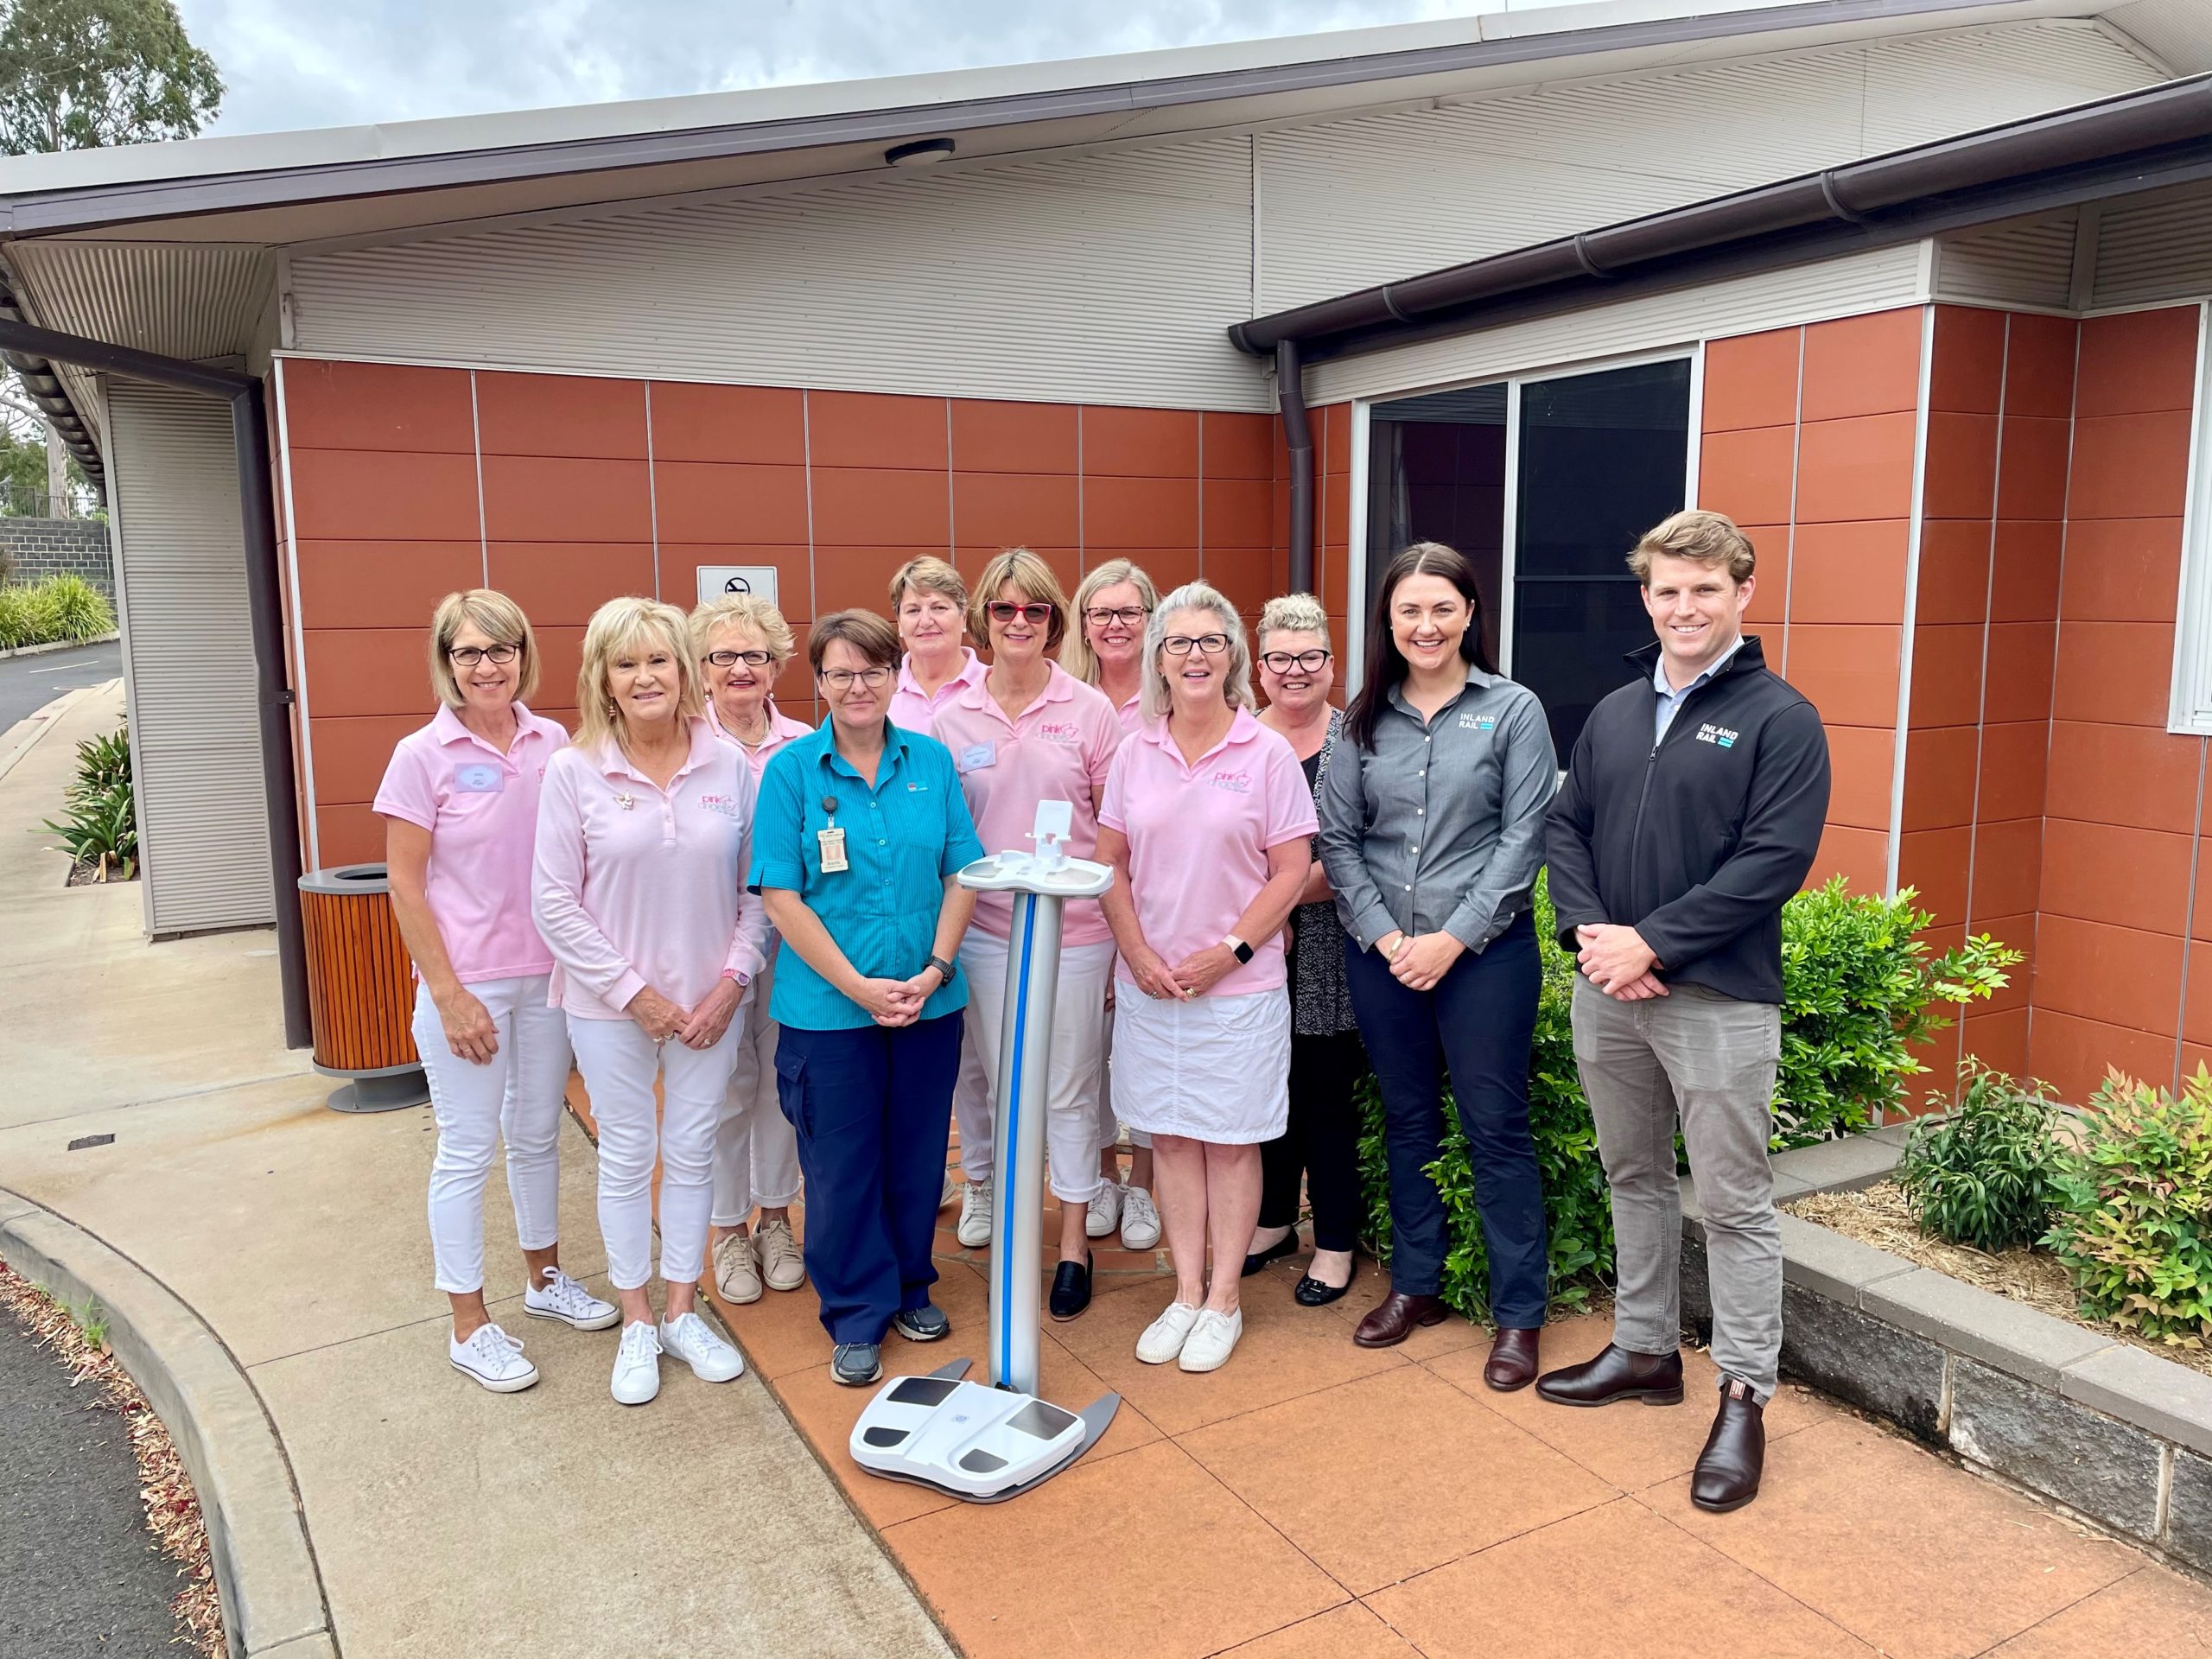 The Pink Angels have purchased vital equipment to assist in the care of breast cancer patients thanks in part to a donation of $4,000 by Inland Rail.